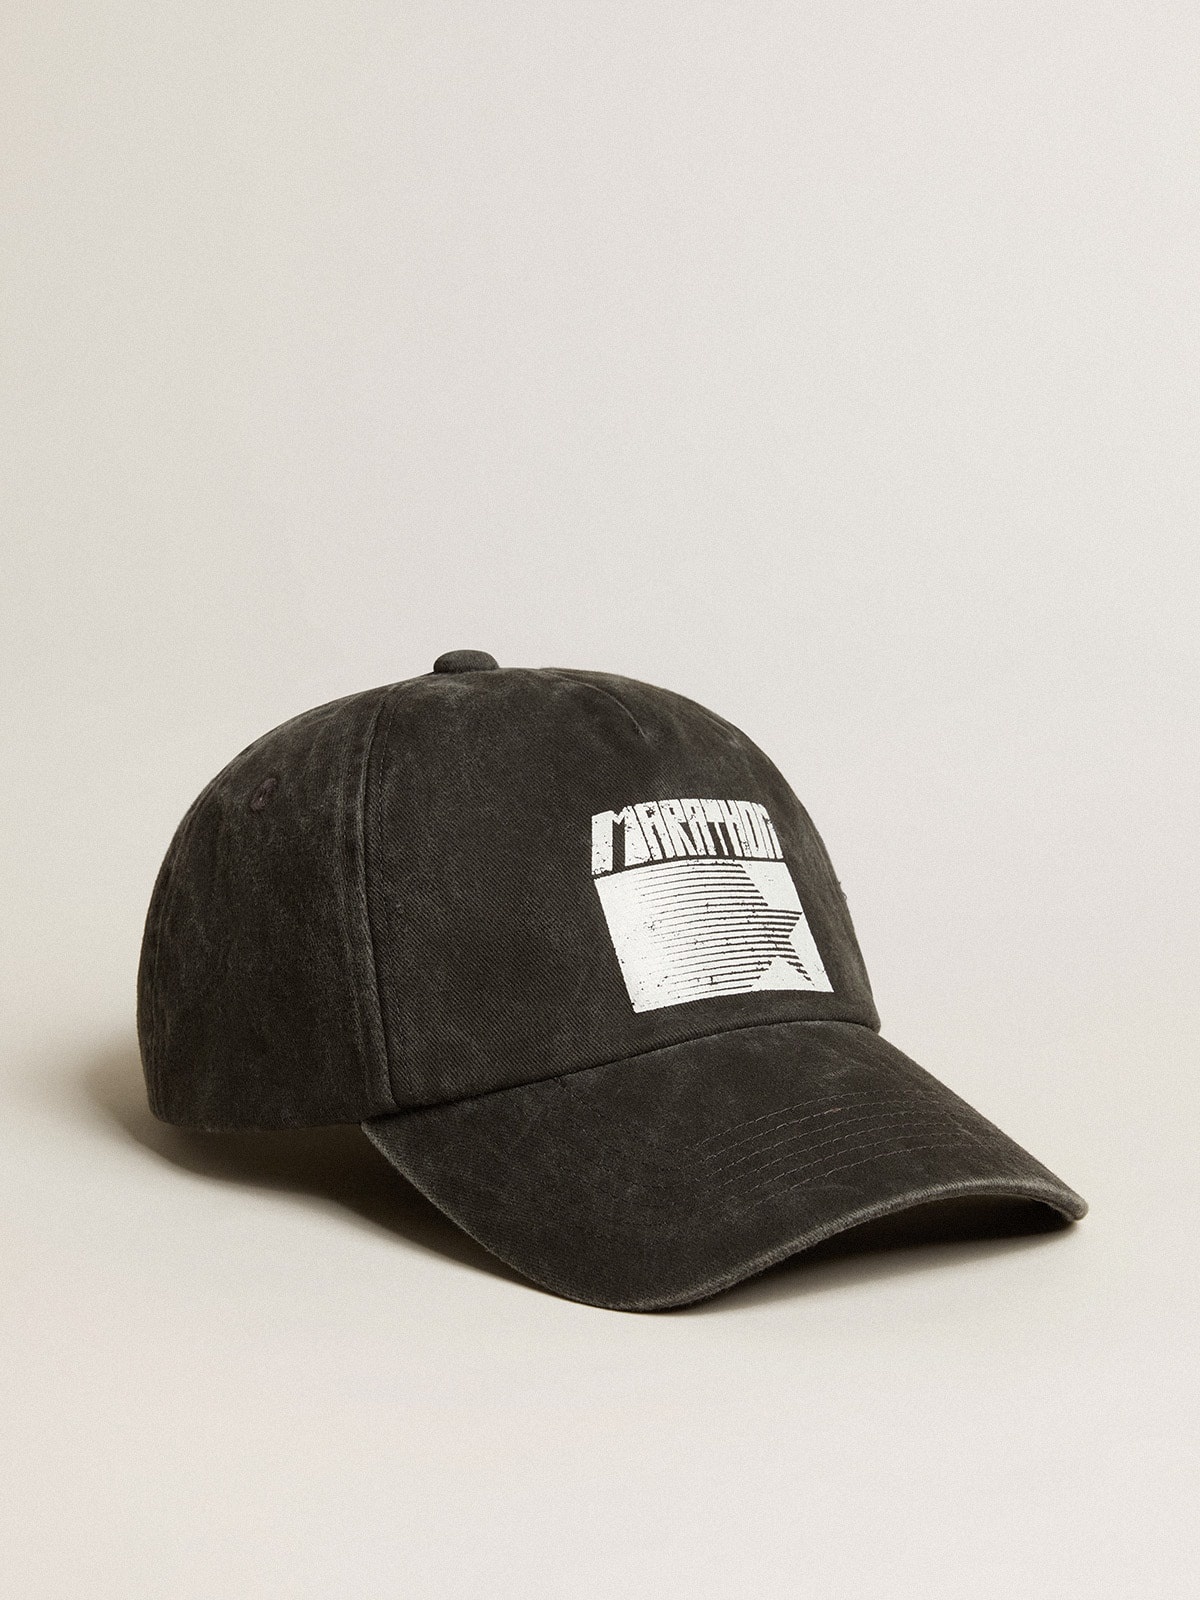 Anthracite gray cap with Marathon logo on the front - 2